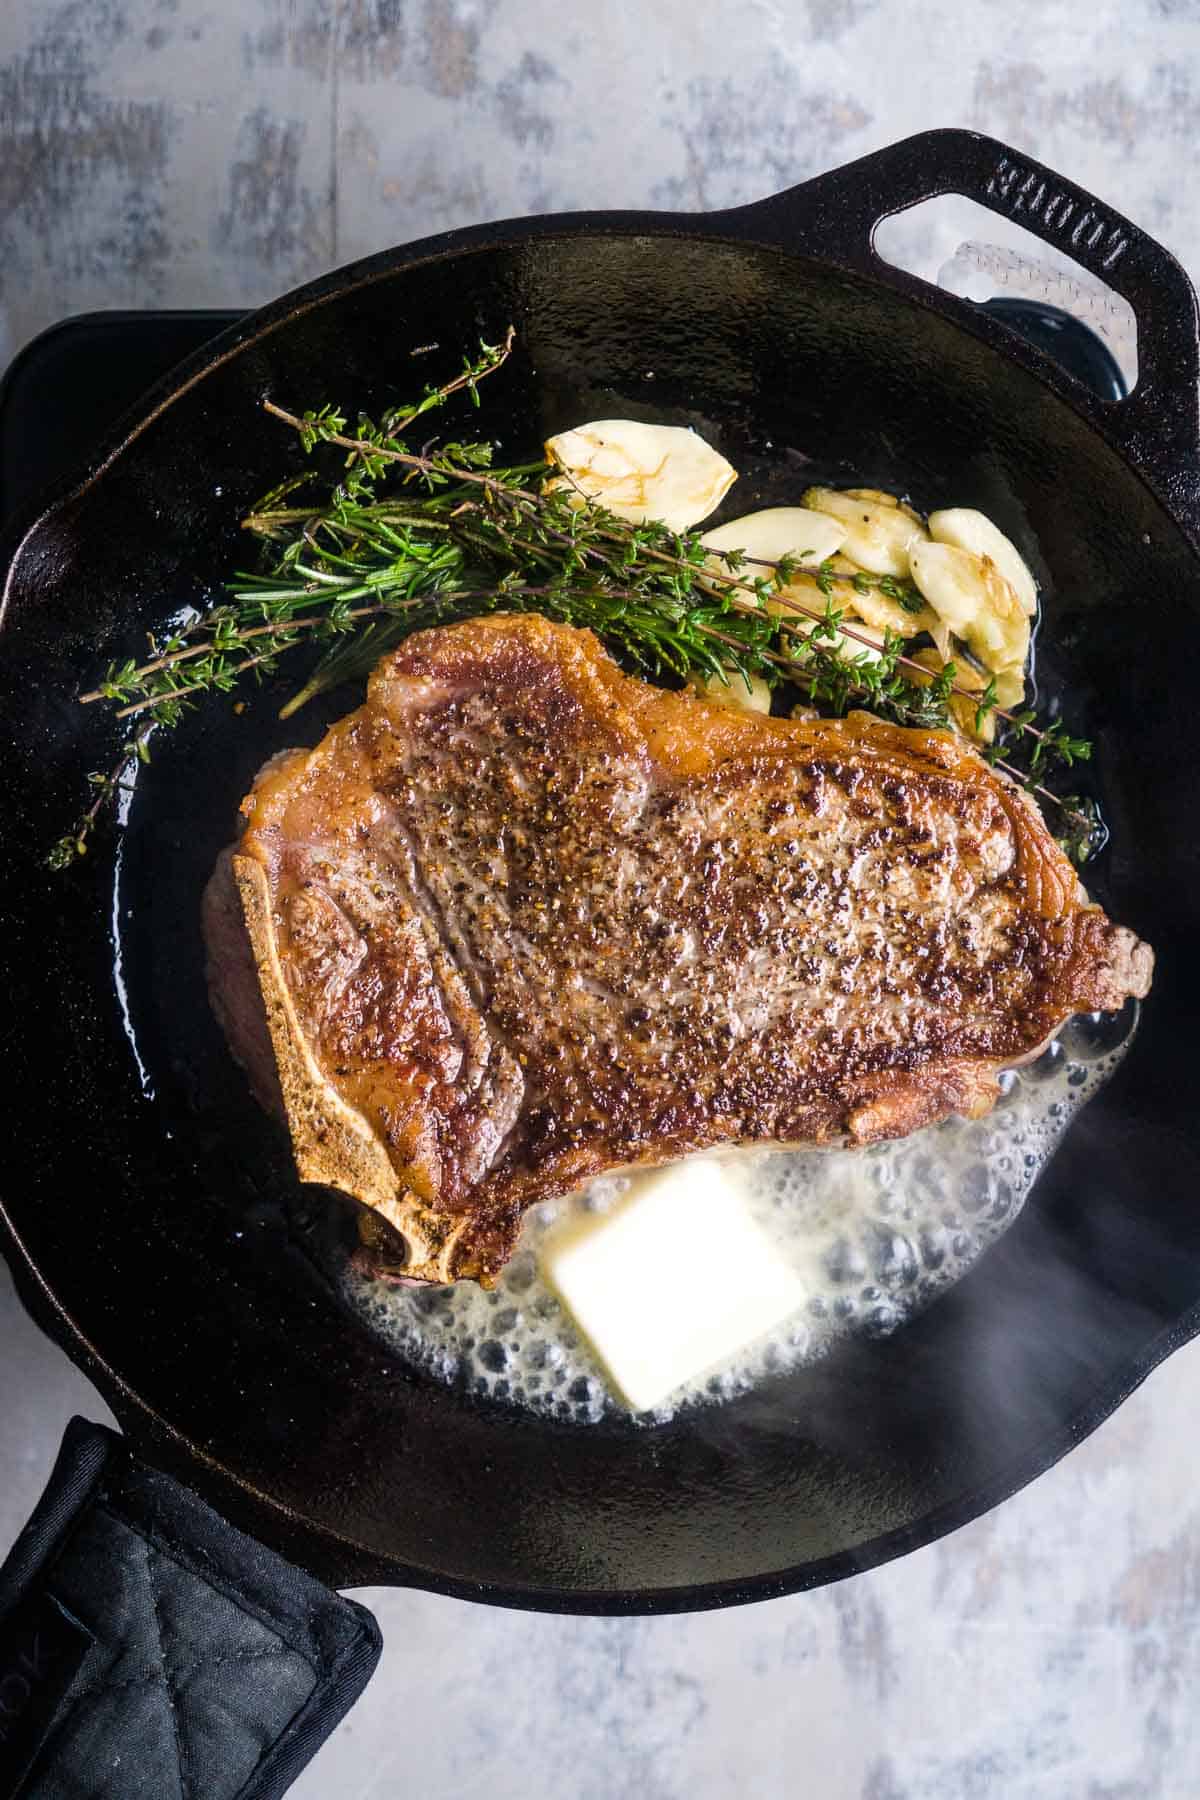 juicy, seared New York strip steak in cast iron skillet with garlic cloves, herb sprigs, and pat of melting butter